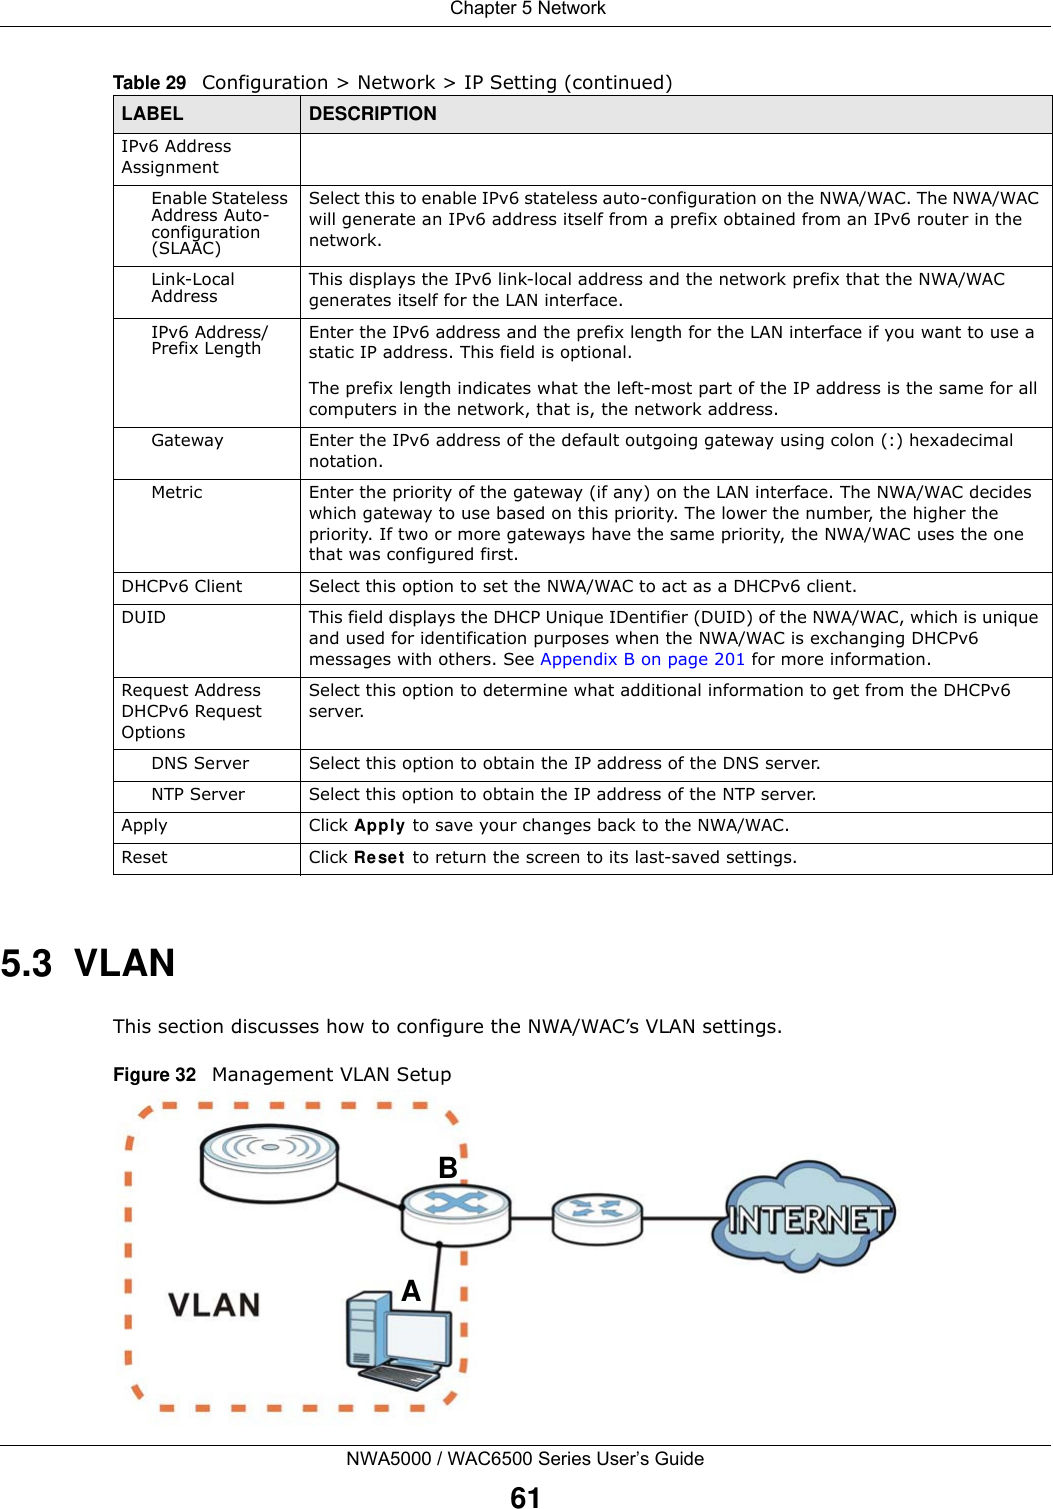  Chapter 5 NetworkNWA5000 / WAC6500 Series User’s Guide615.3  VLANThis section discusses how to configure the NWA/WAC’s VLAN settings.Figure 32   Management VLAN SetupIPv6 Address AssignmentEnable Stateless Address Auto-configuration (SLAAC)Select this to enable IPv6 stateless auto-configuration on the NWA/WAC. The NWA/WAC will generate an IPv6 address itself from a prefix obtained from an IPv6 router in the network.Link-Local Address This displays the IPv6 link-local address and the network prefix that the NWA/WAC generates itself for the LAN interface.IPv6 Address/Prefix Length Enter the IPv6 address and the prefix length for the LAN interface if you want to use a static IP address. This field is optional.The prefix length indicates what the left-most part of the IP address is the same for all computers in the network, that is, the network address.Gateway Enter the IPv6 address of the default outgoing gateway using colon (:) hexadecimal notation.Metric Enter the priority of the gateway (if any) on the LAN interface. The NWA/WAC decides which gateway to use based on this priority. The lower the number, the higher the priority. If two or more gateways have the same priority, the NWA/WAC uses the one that was configured first.DHCPv6 Client Select this option to set the NWA/WAC to act as a DHCPv6 client.DUID This field displays the DHCP Unique IDentifier (DUID) of the NWA/WAC, which is unique and used for identification purposes when the NWA/WAC is exchanging DHCPv6 messages with others. See Appendix B on page 201 for more information.Request Address DHCPv6 Request OptionsSelect this option to determine what additional information to get from the DHCPv6 server. DNS Server Select this option to obtain the IP address of the DNS server.NTP Server Select this option to obtain the IP address of the NTP server.Apply Click Apply to save your changes back to the NWA/WAC.Reset Click Re se t  to return the screen to its last-saved settings. Table 29   Configuration &gt; Network &gt; IP Setting (continued)LABEL  DESCRIPTIONAB